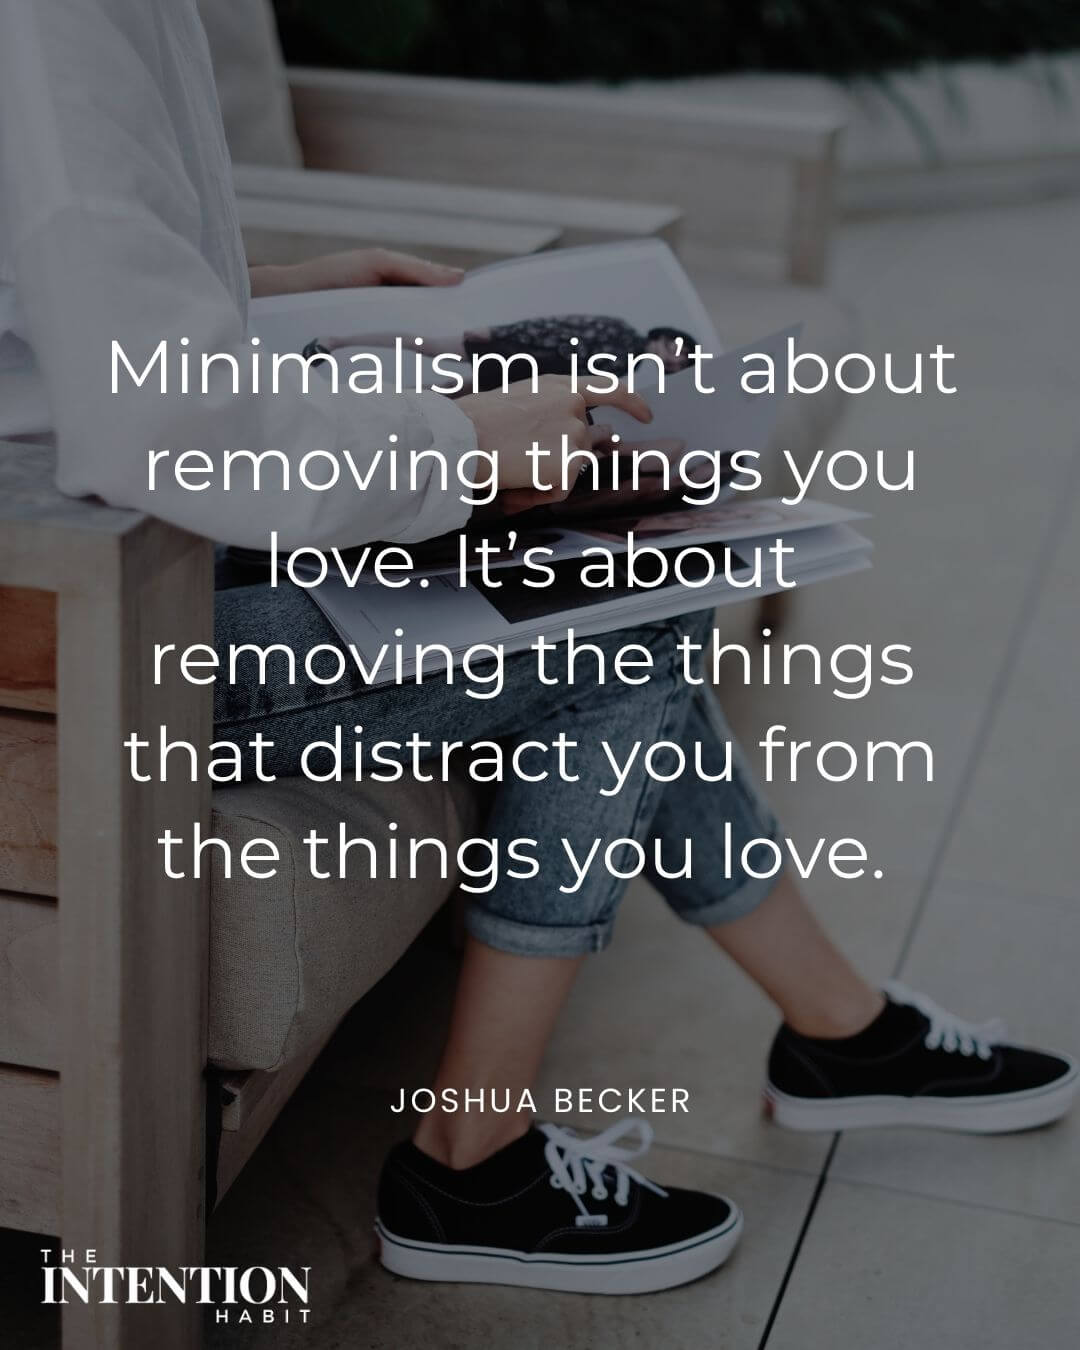 Intentional living quote - minimalism isnt about removing things you love. Its about removing the things that distract you from the things you love